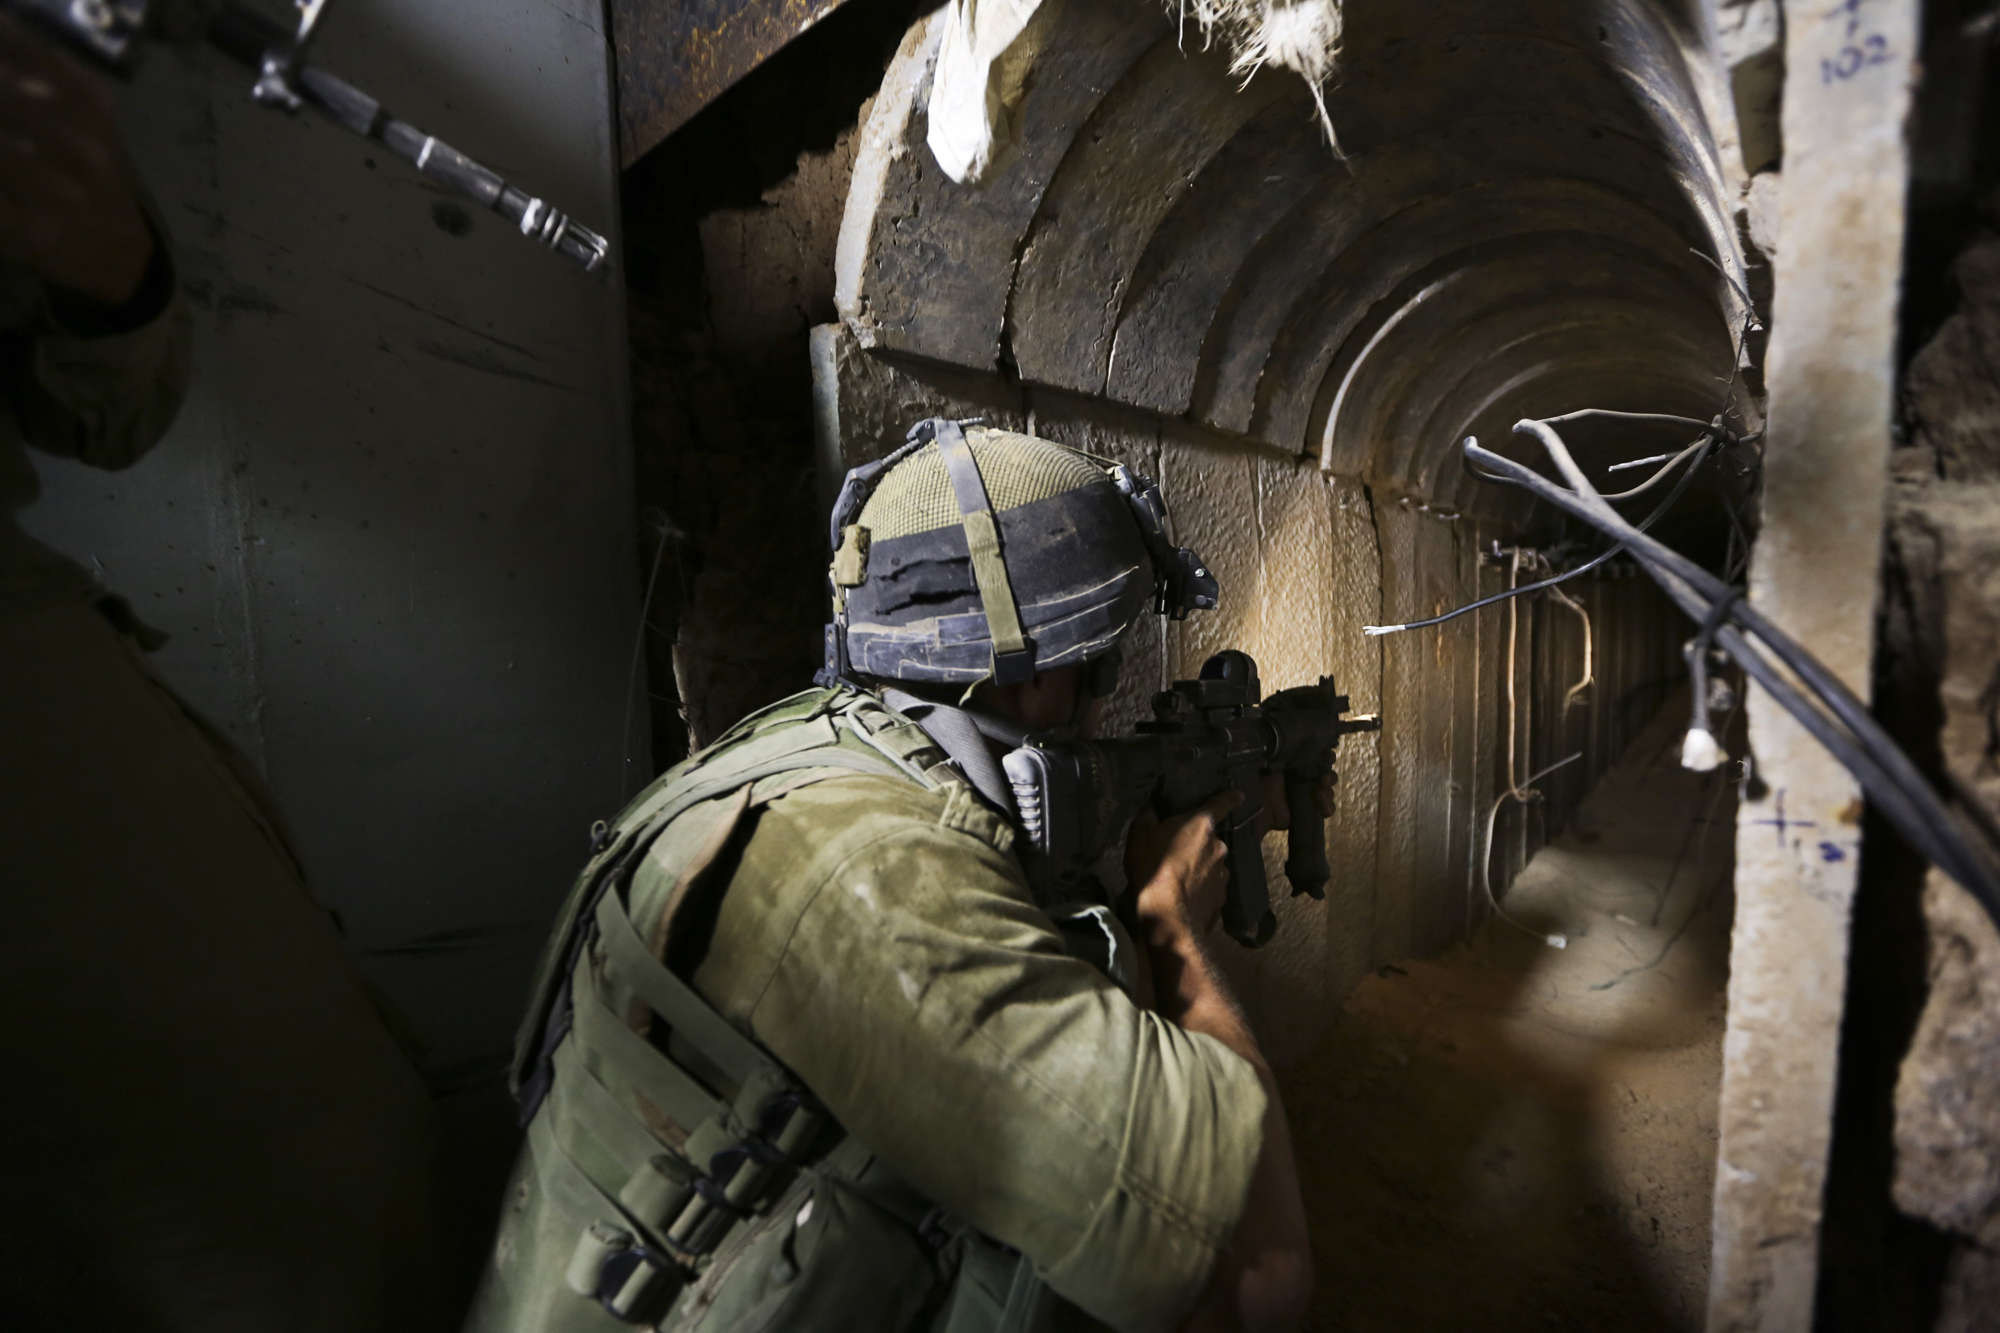 IDF soldiers of the Paratroopers Brigade guarding and neutralizing tunnels that were dug by the Hamas organization and leading into Israel,  Khan Younis, Gaza, July 30, 2014. (Ziv Koren—Polaris)